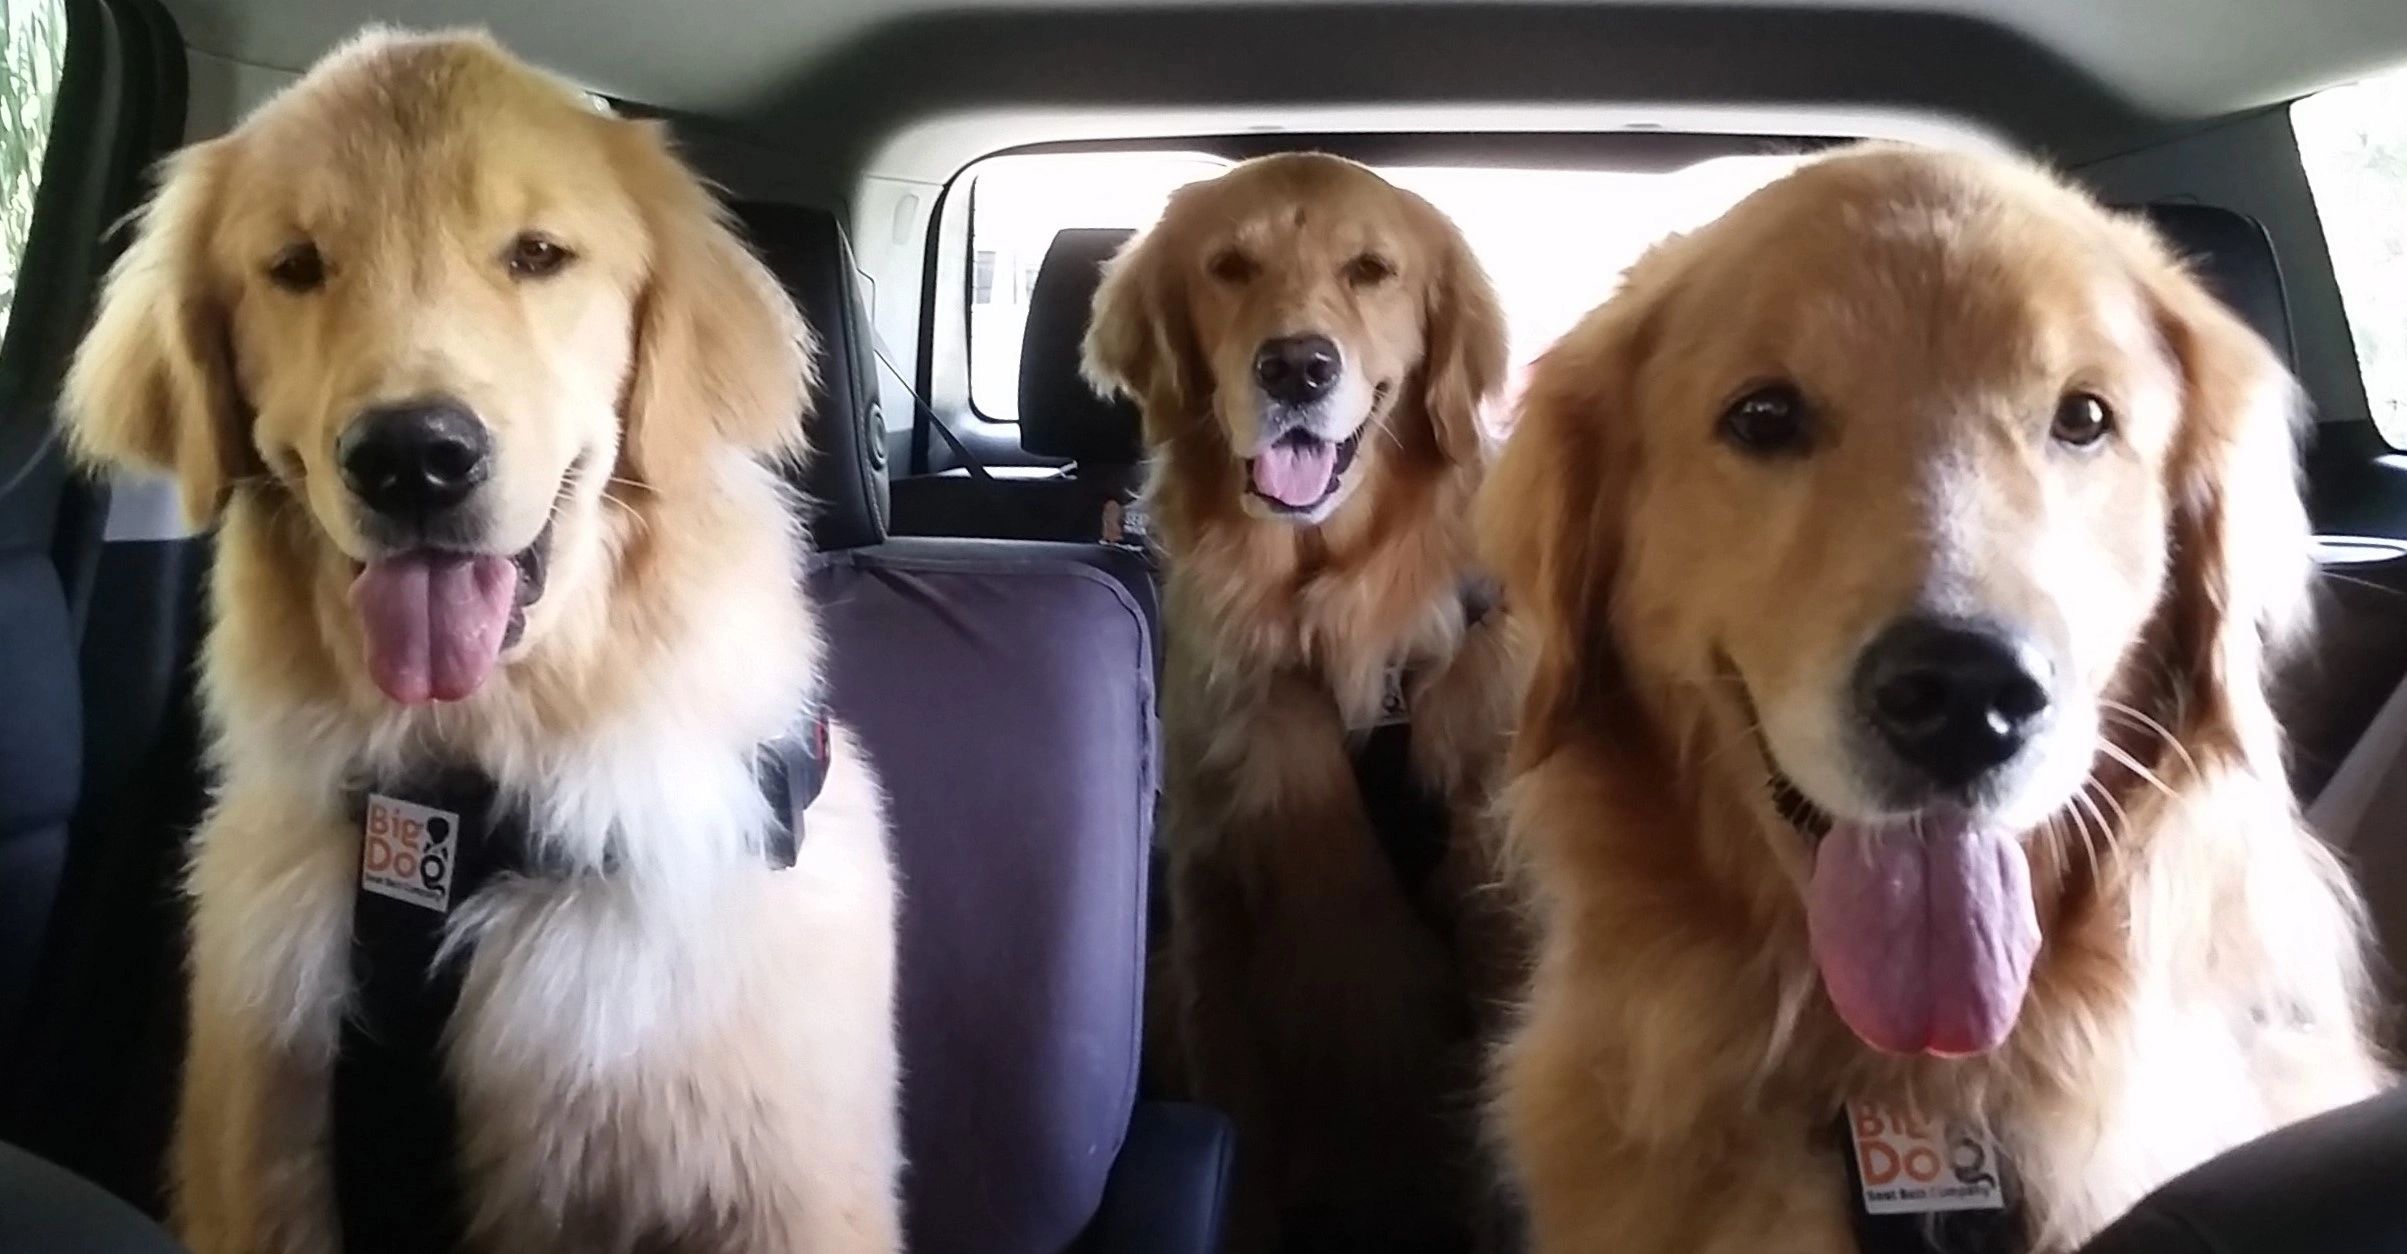 Three Golden Retrievers "Real Customers" are wearing their Big Dog Seat Belts riding in a van.